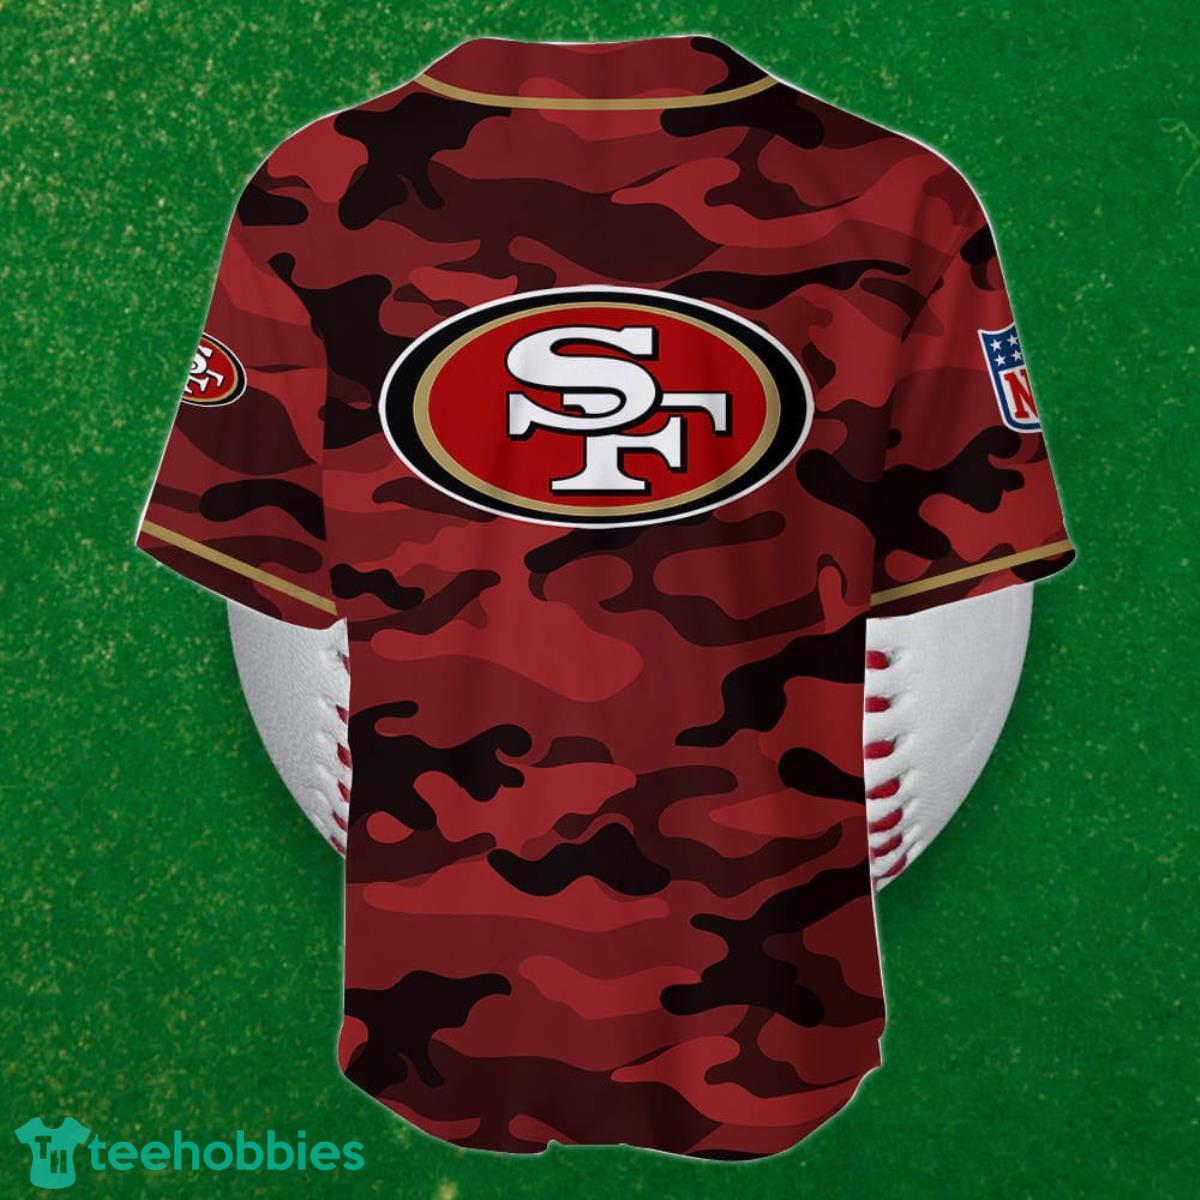 Personalized San Francisco 49ers Baseball Jersey Shirt For Fans